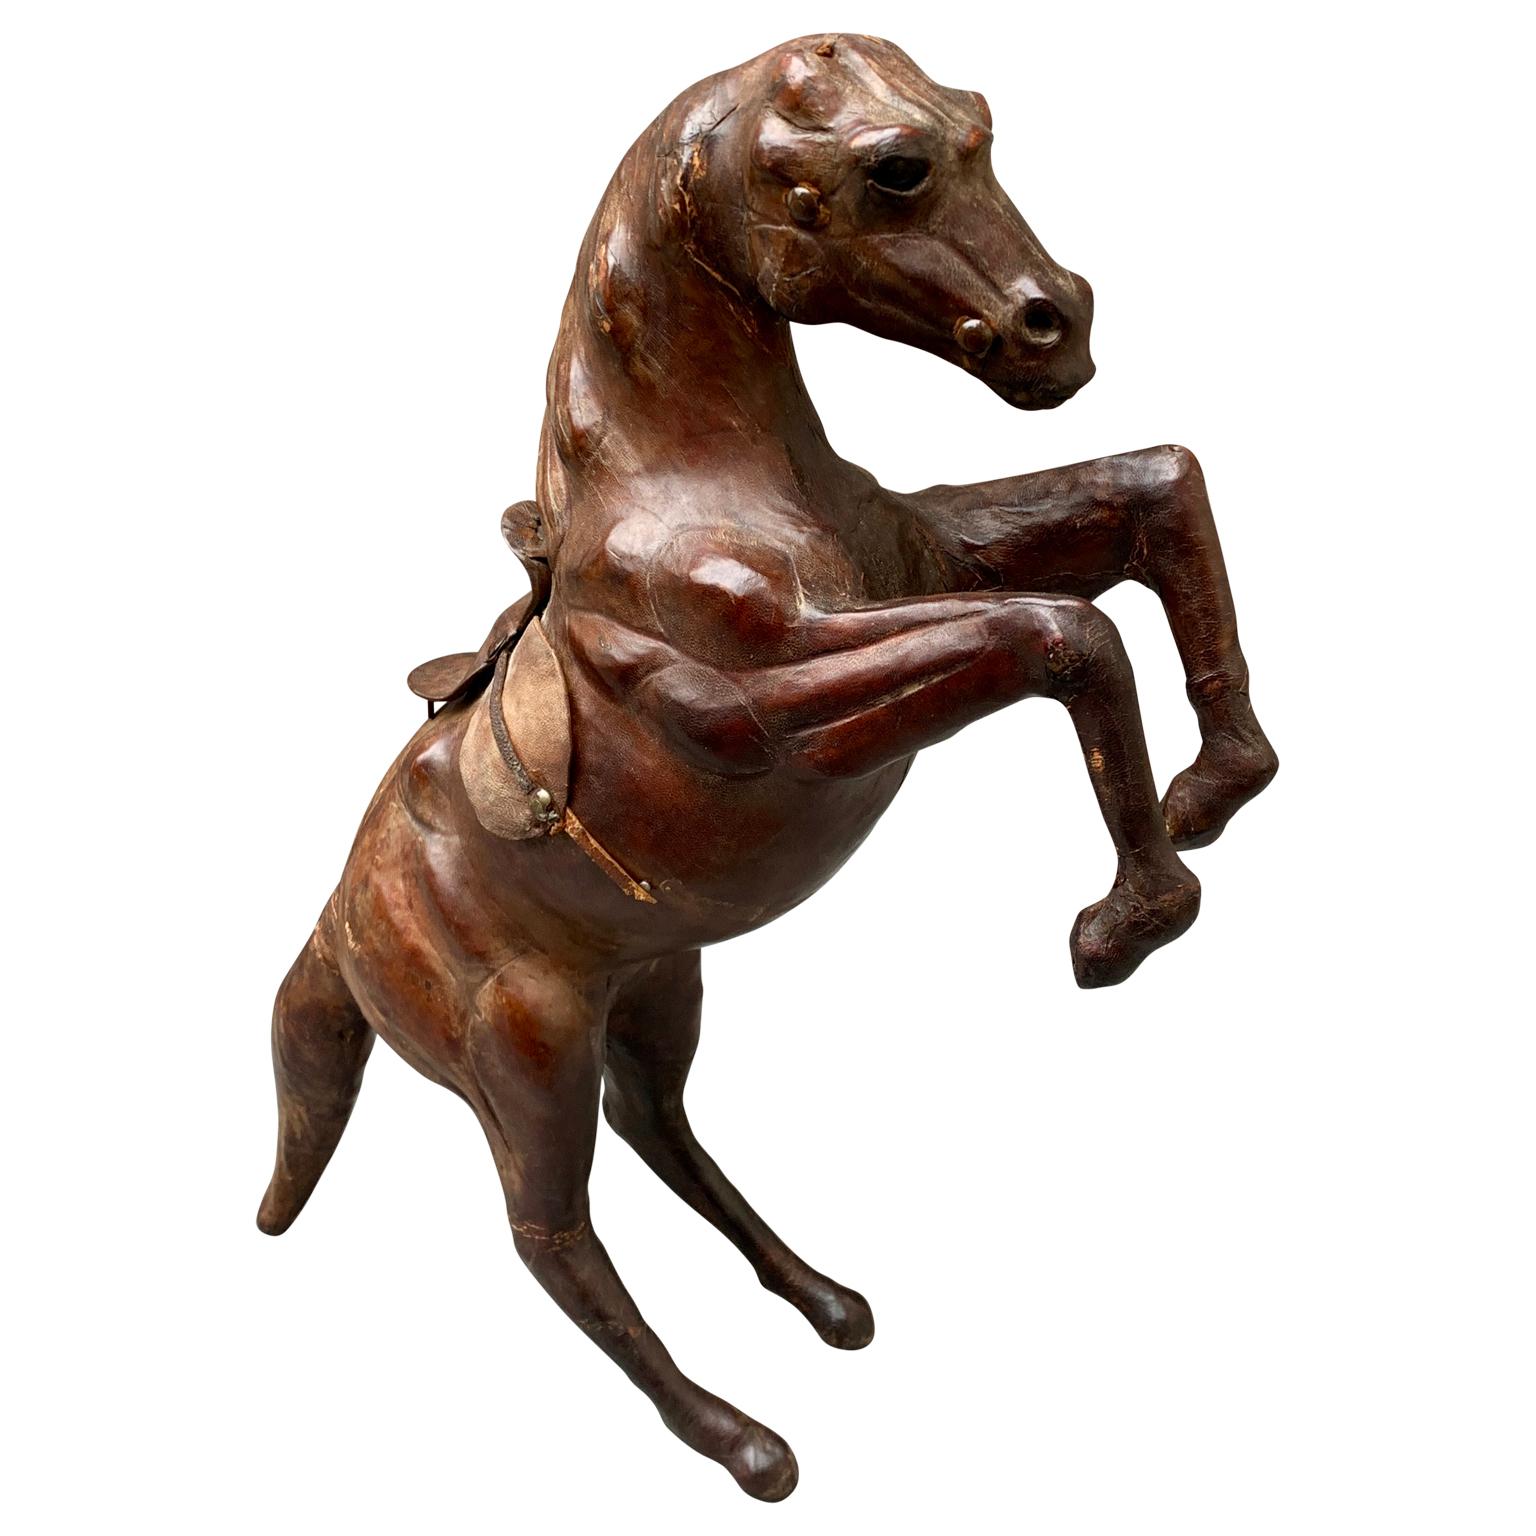 An Early 20th Century animal figurative sculpture of a rising horse in leather and papier-maché. This decorative equine figure is standing with the help of its tail. There is quite a bit of detail to this piece, including a handmade leather saddle